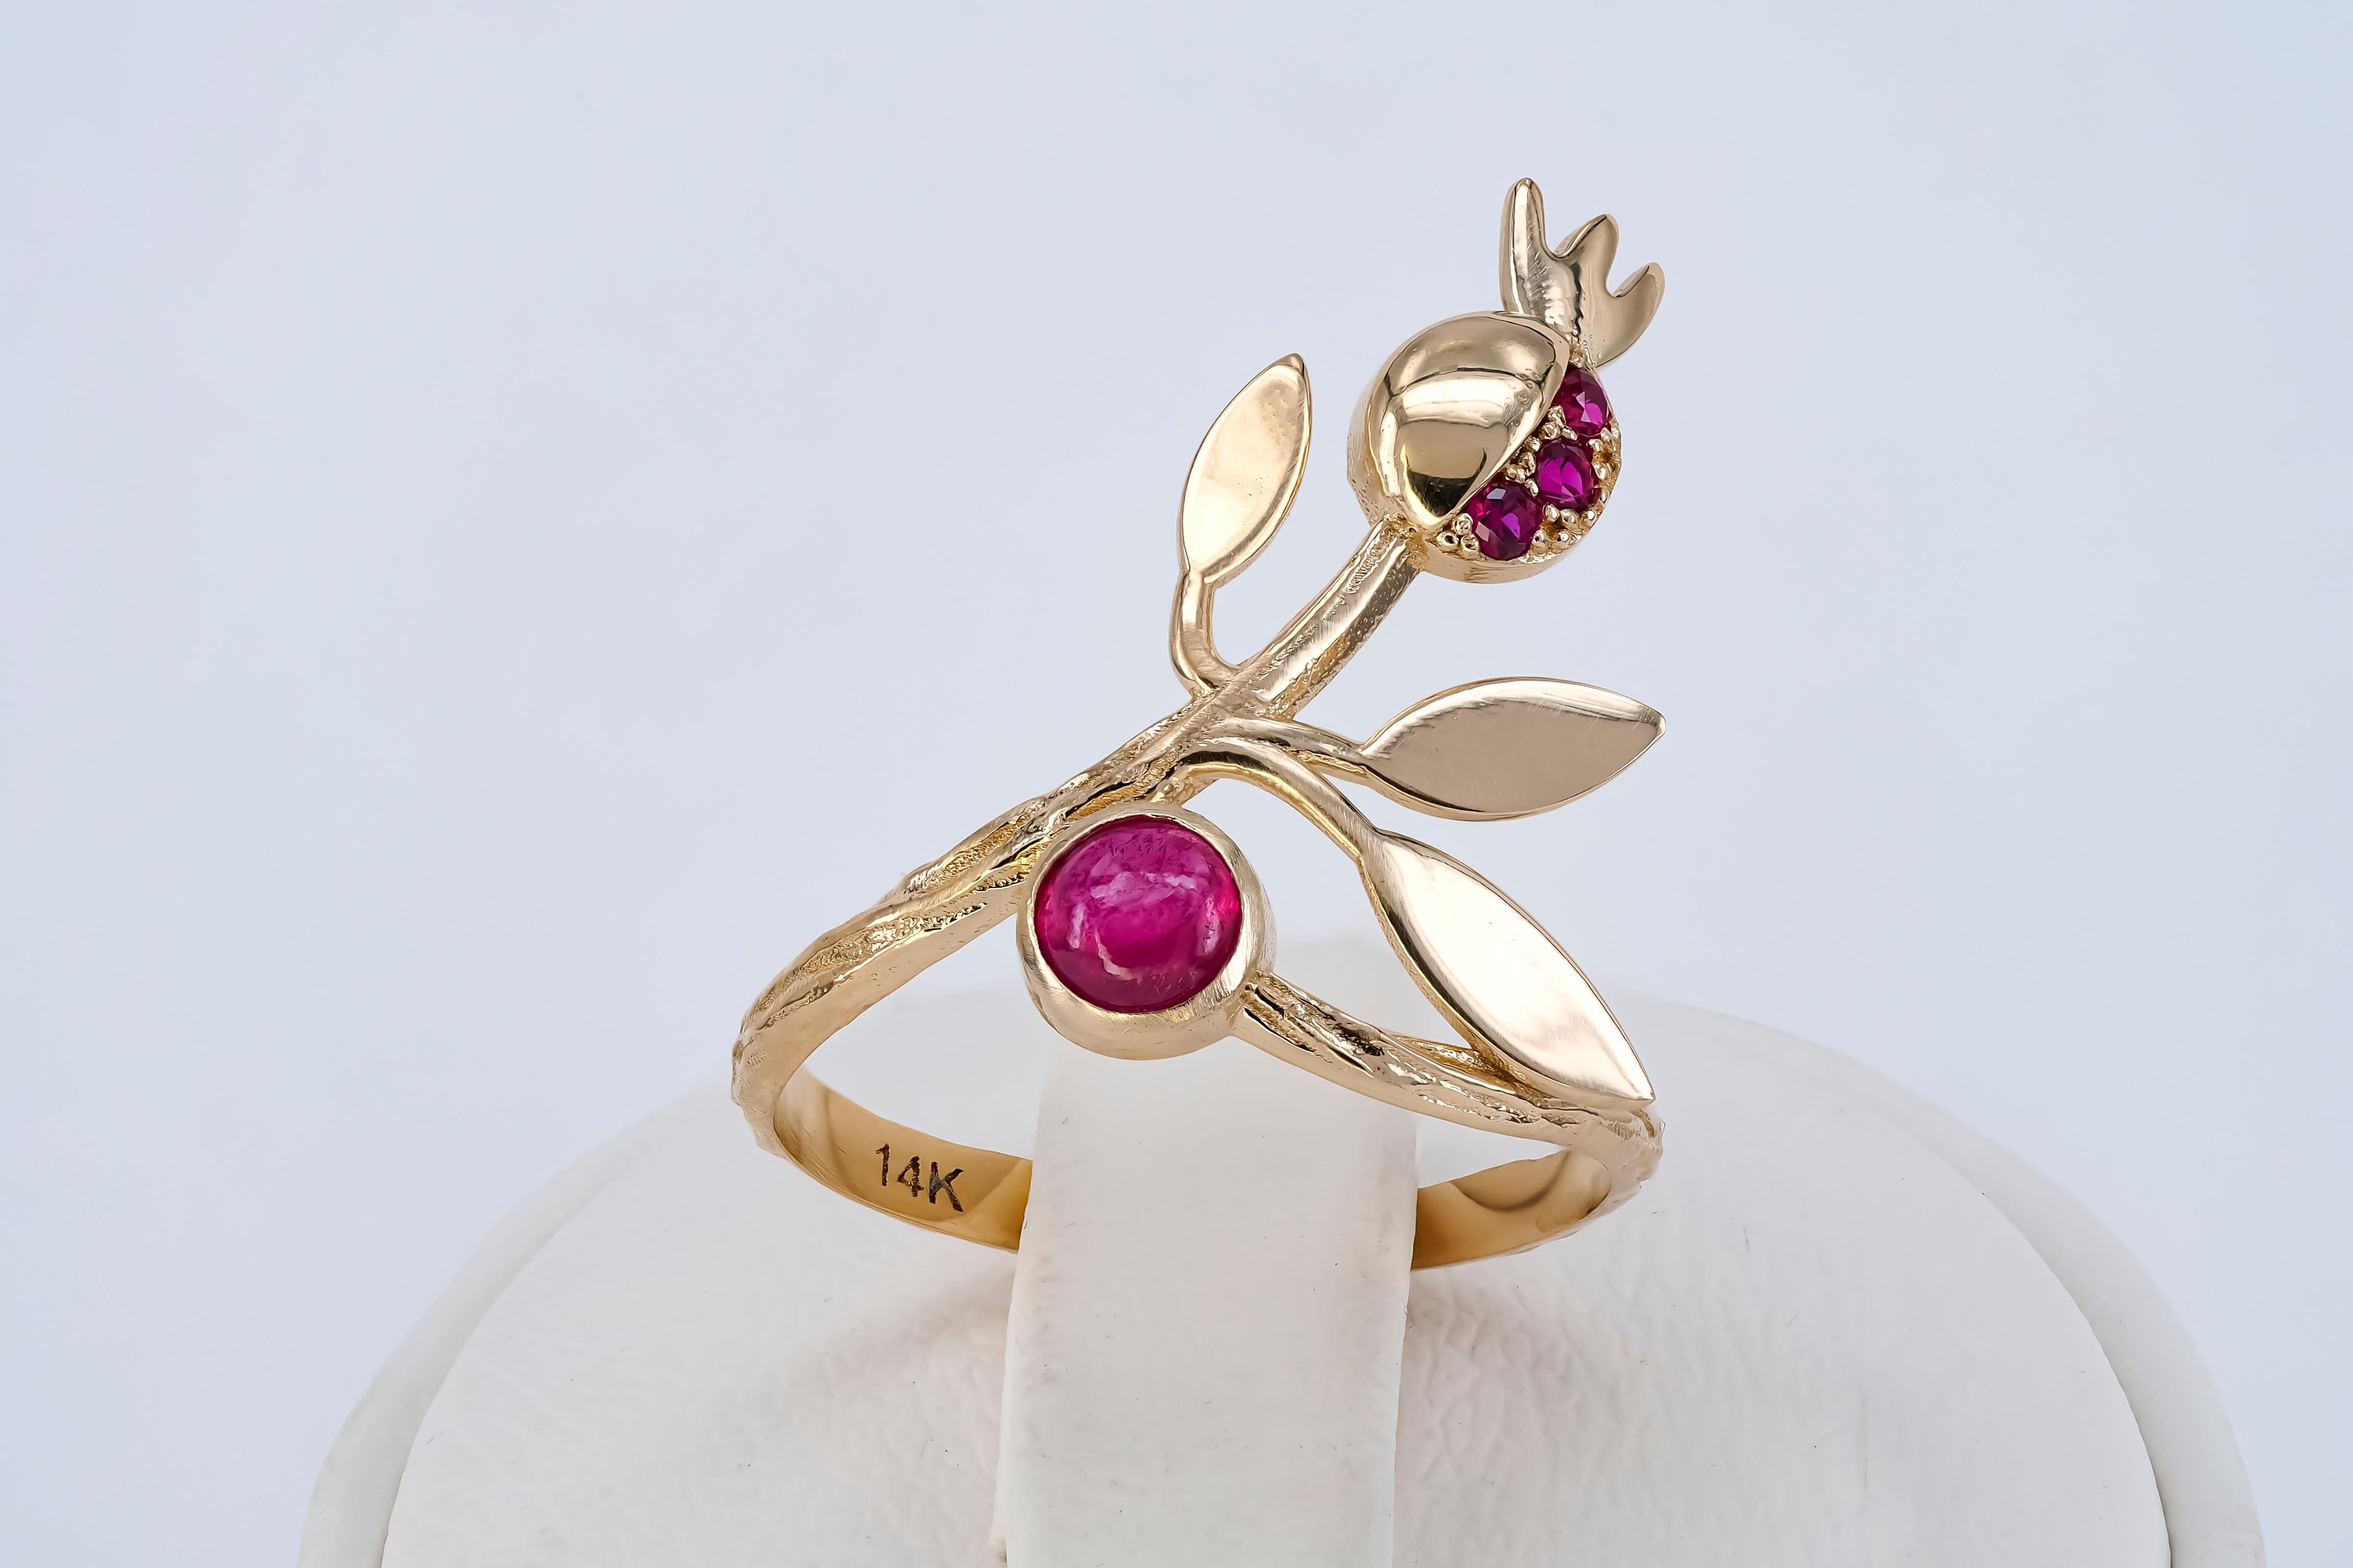 For Sale:  14 karat Gold Ring with Ruby, Sapphires. Pomegranate ring. July birthstone ring! 17